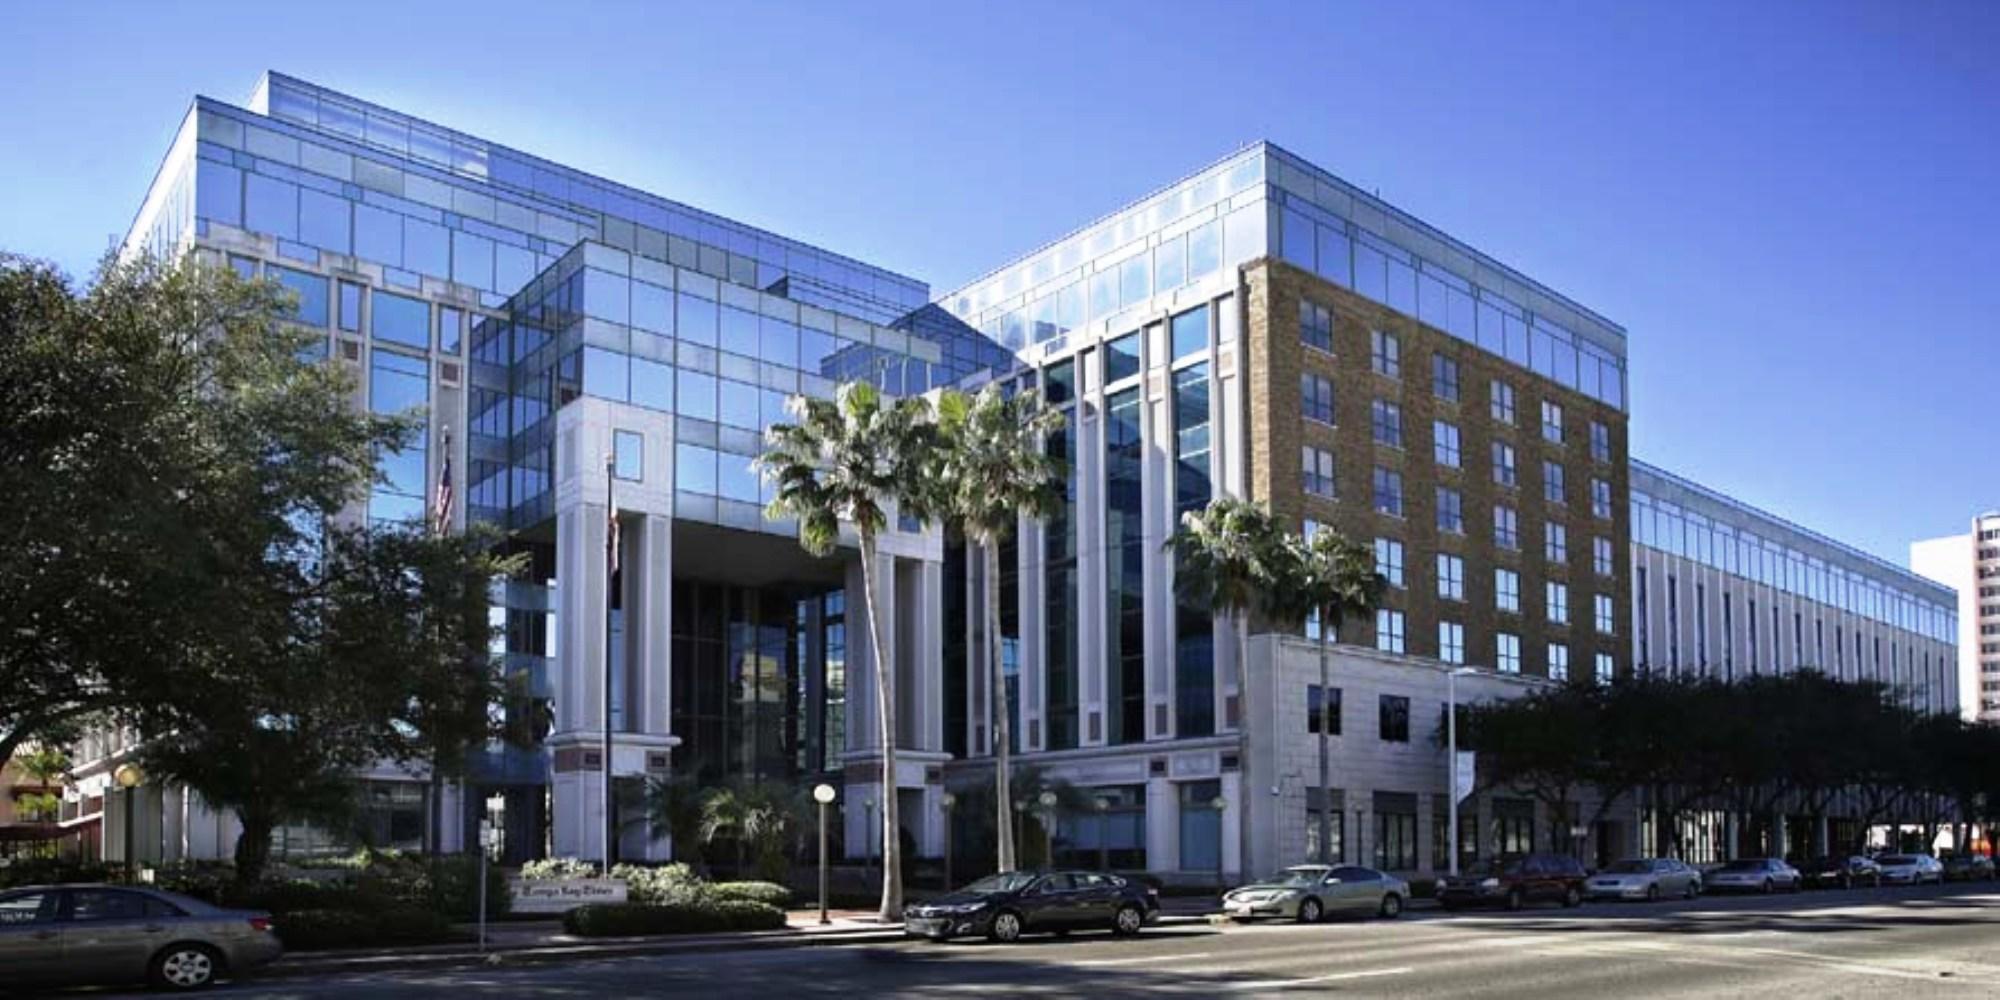 490 First Avenue South in downtown St. Petersburg